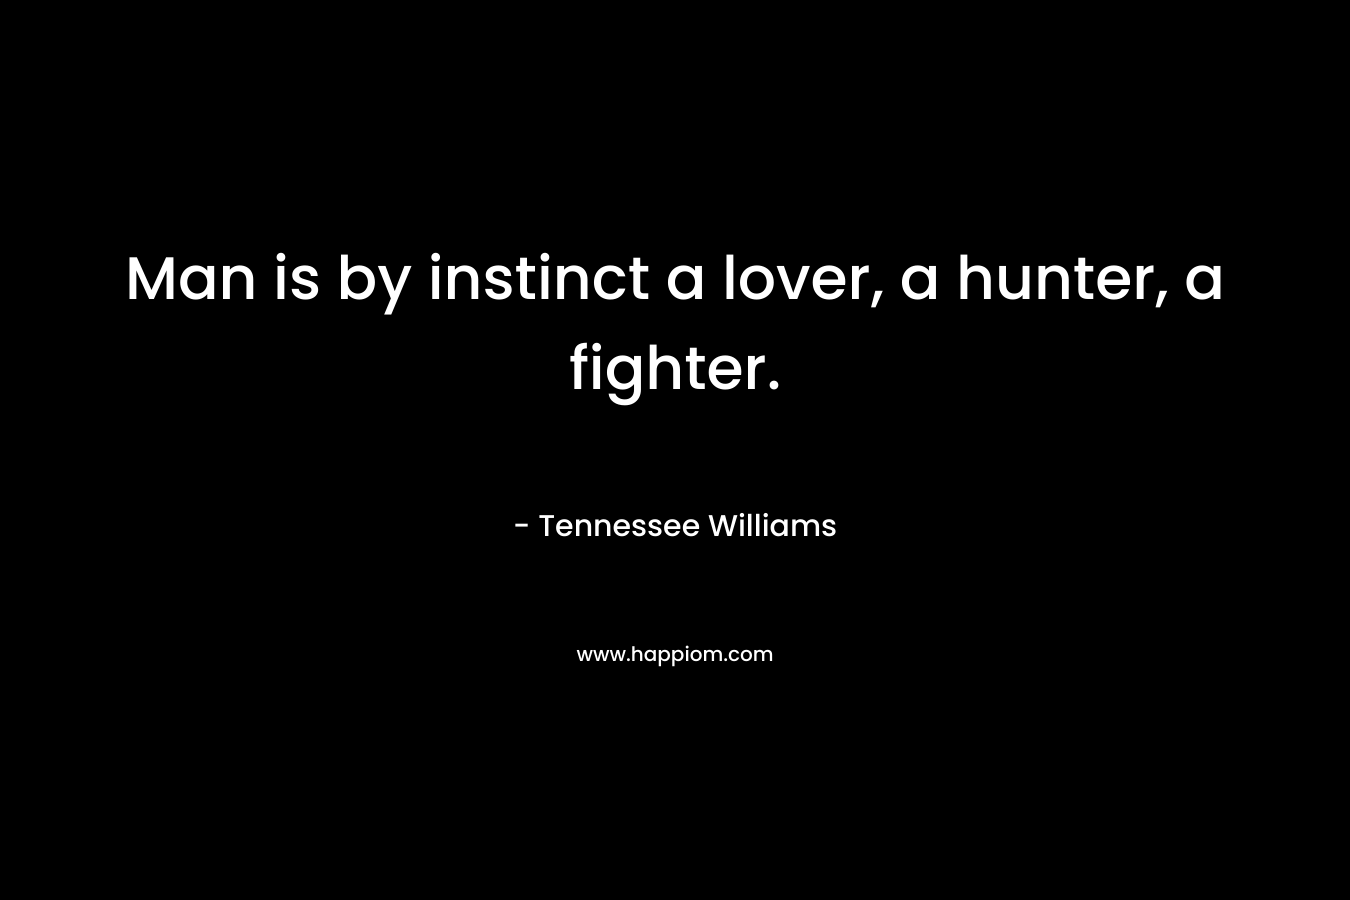 Man is by instinct a lover, a hunter, a fighter.